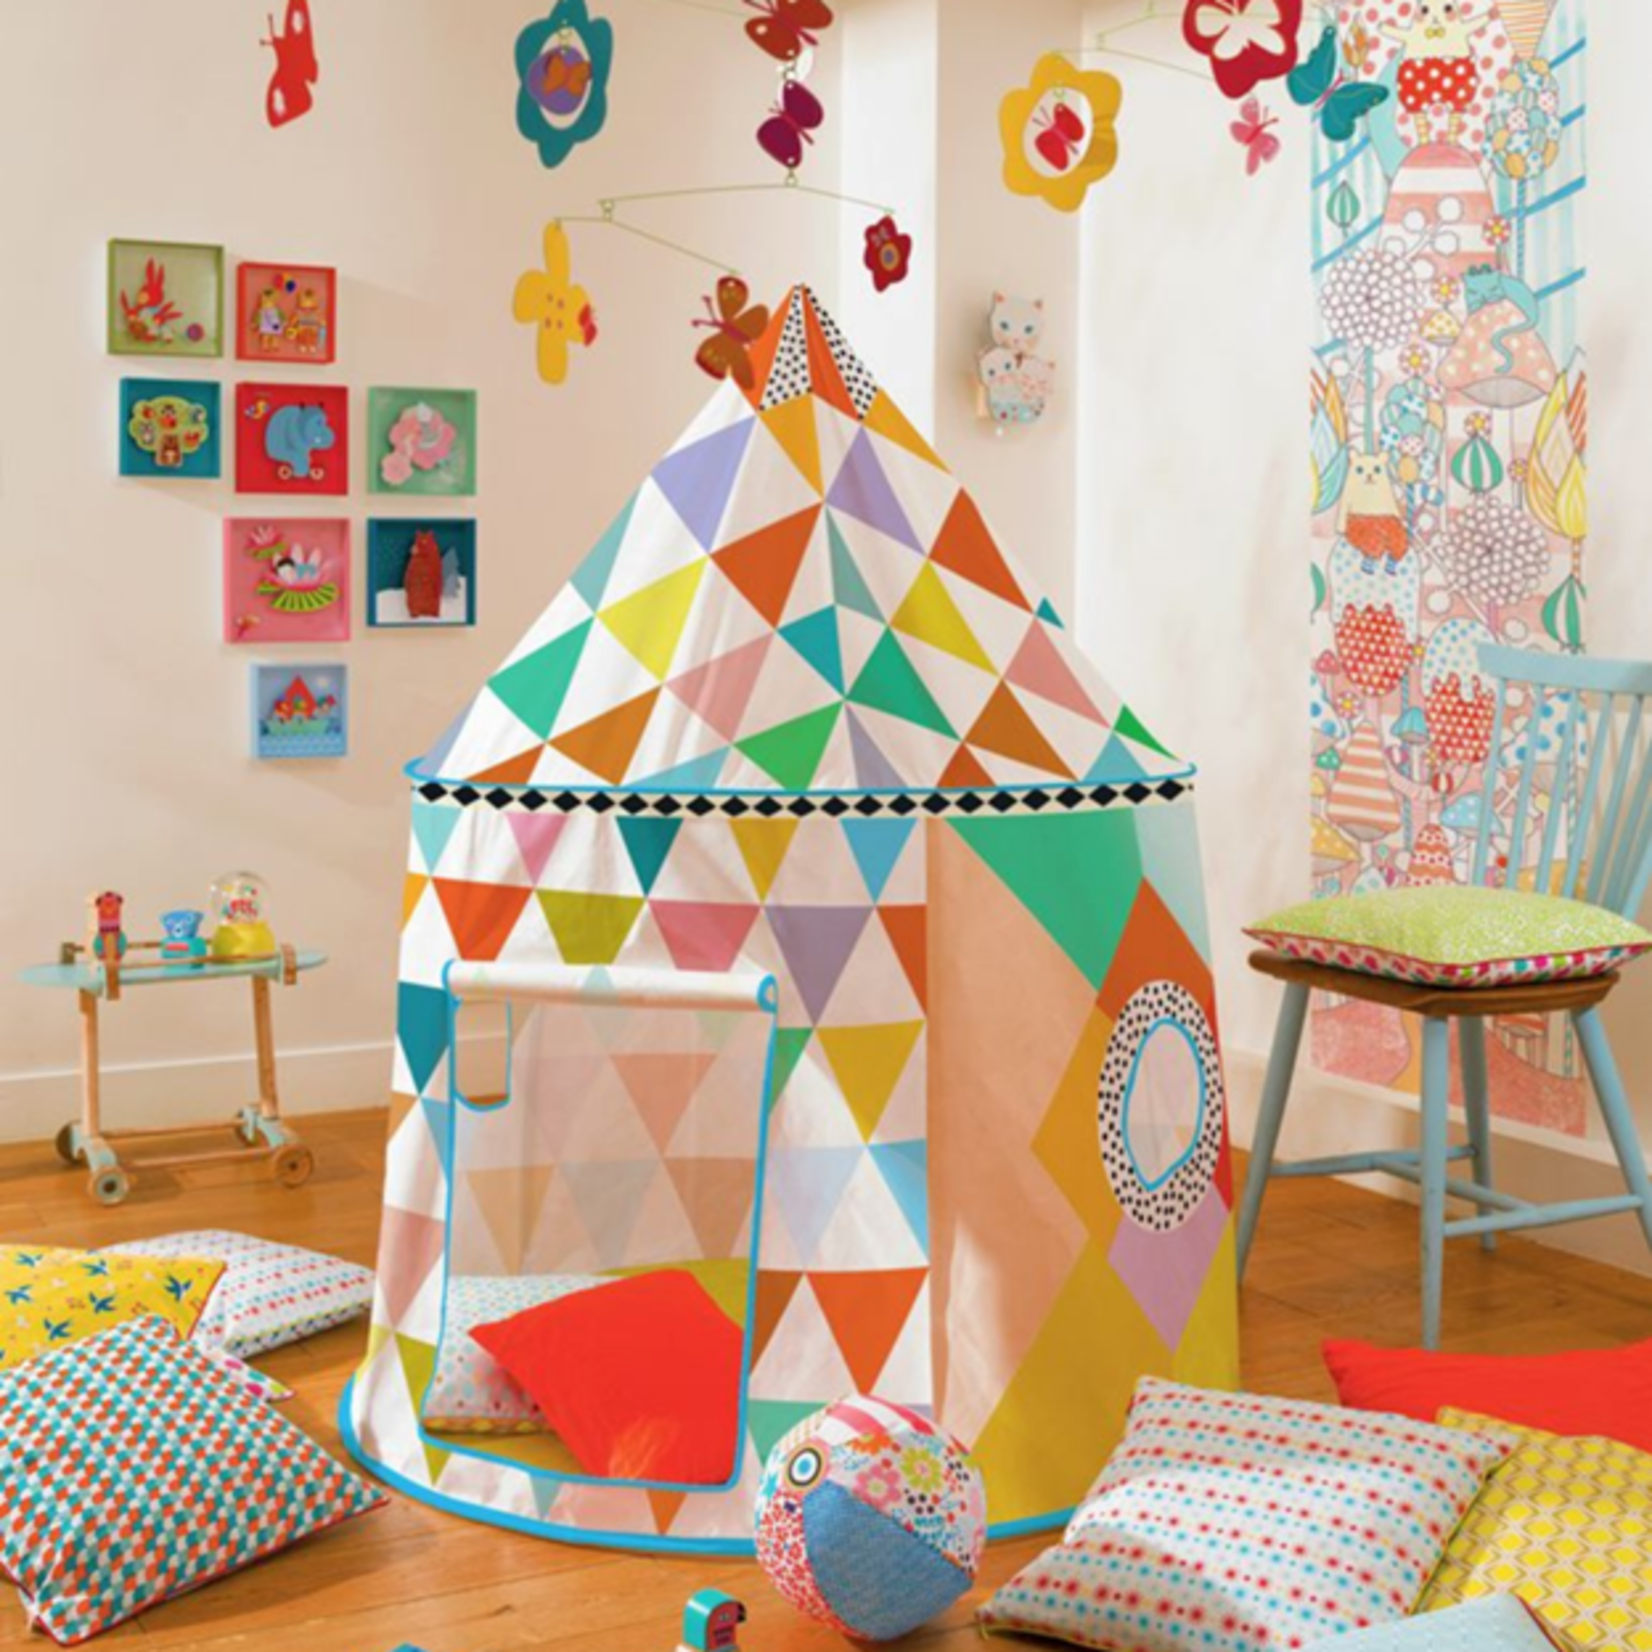 Djeco Play Tent - Multicolored Play Tent